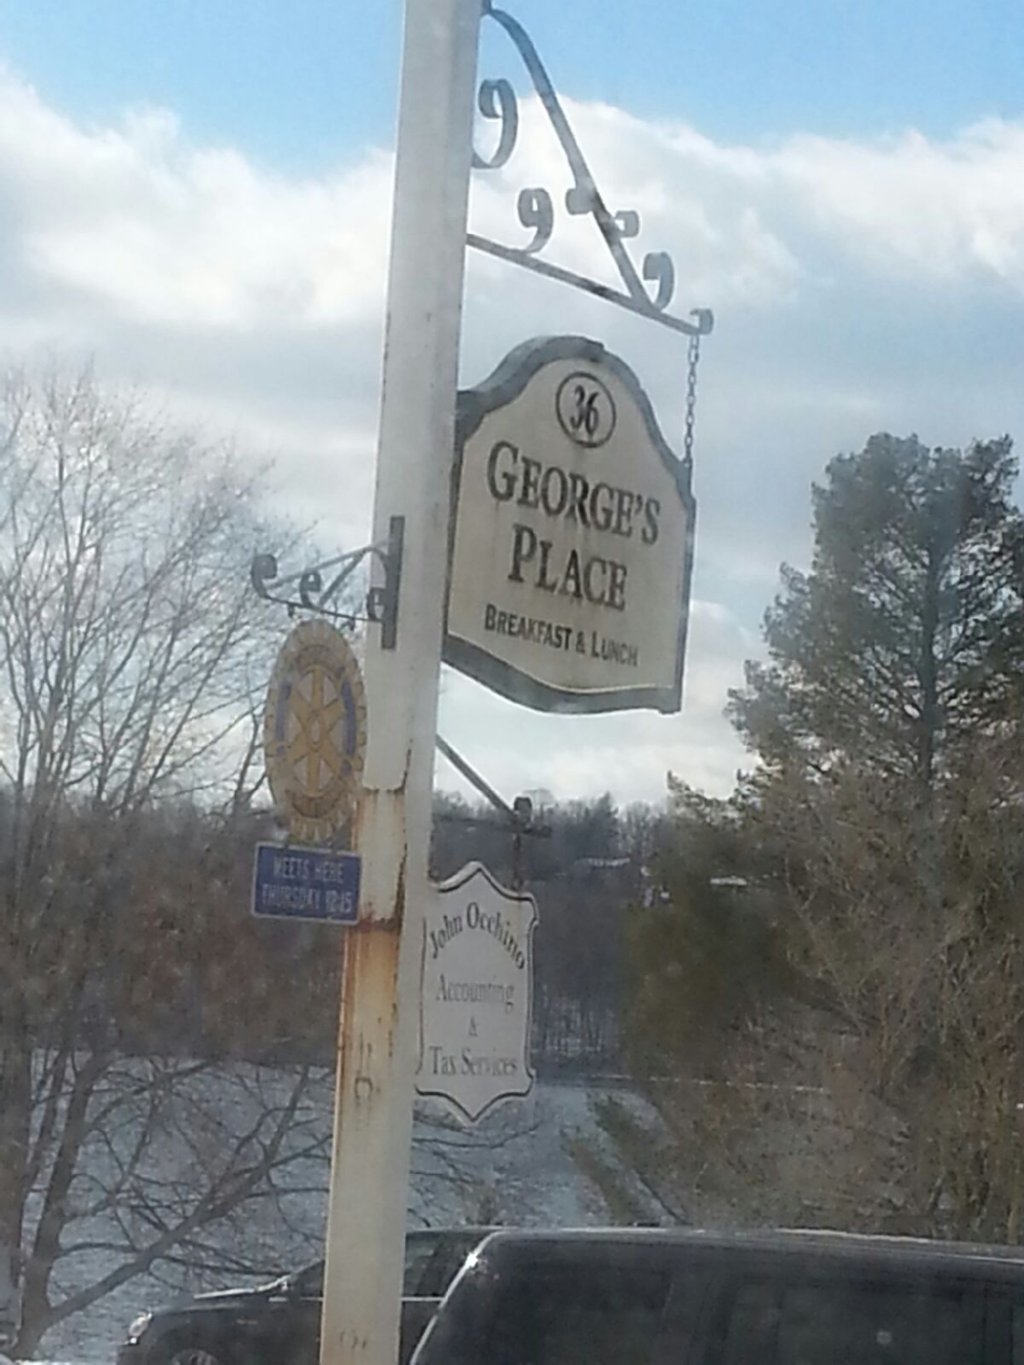 George`s Place